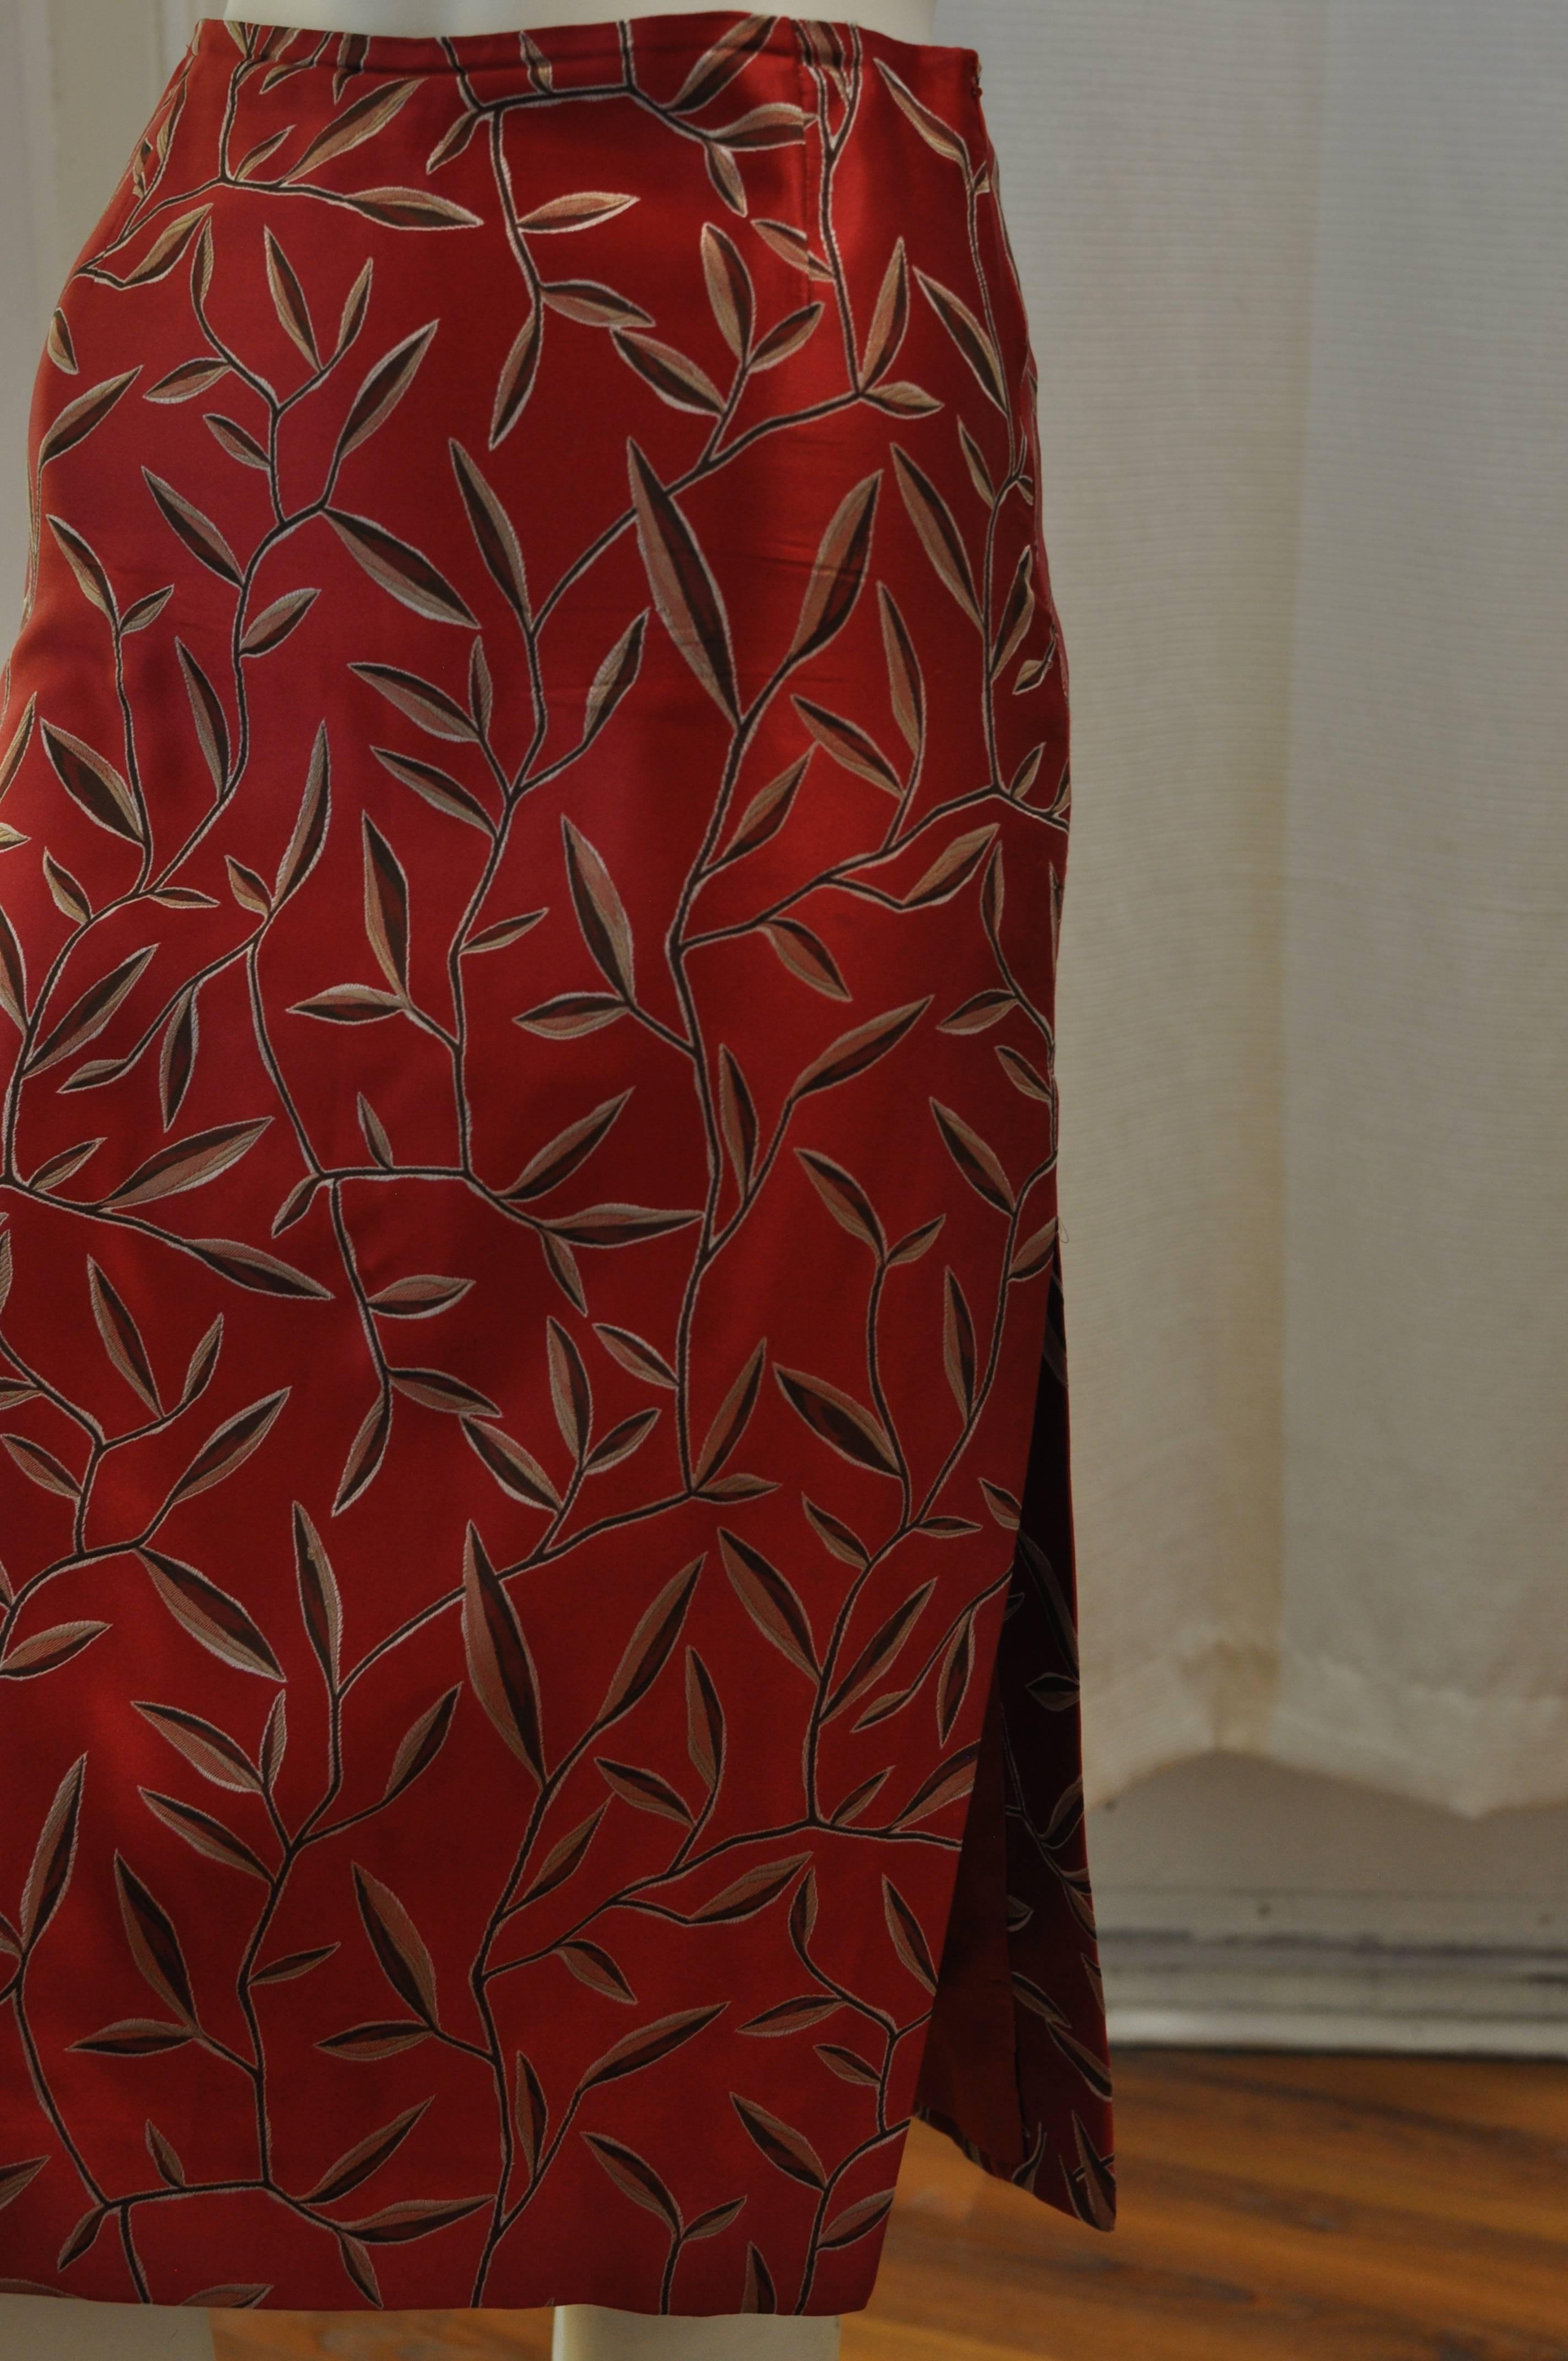 Lovely silk skirt with a nice leaf pattern throughout. This straight skirt has two side slits and a side zip closure.